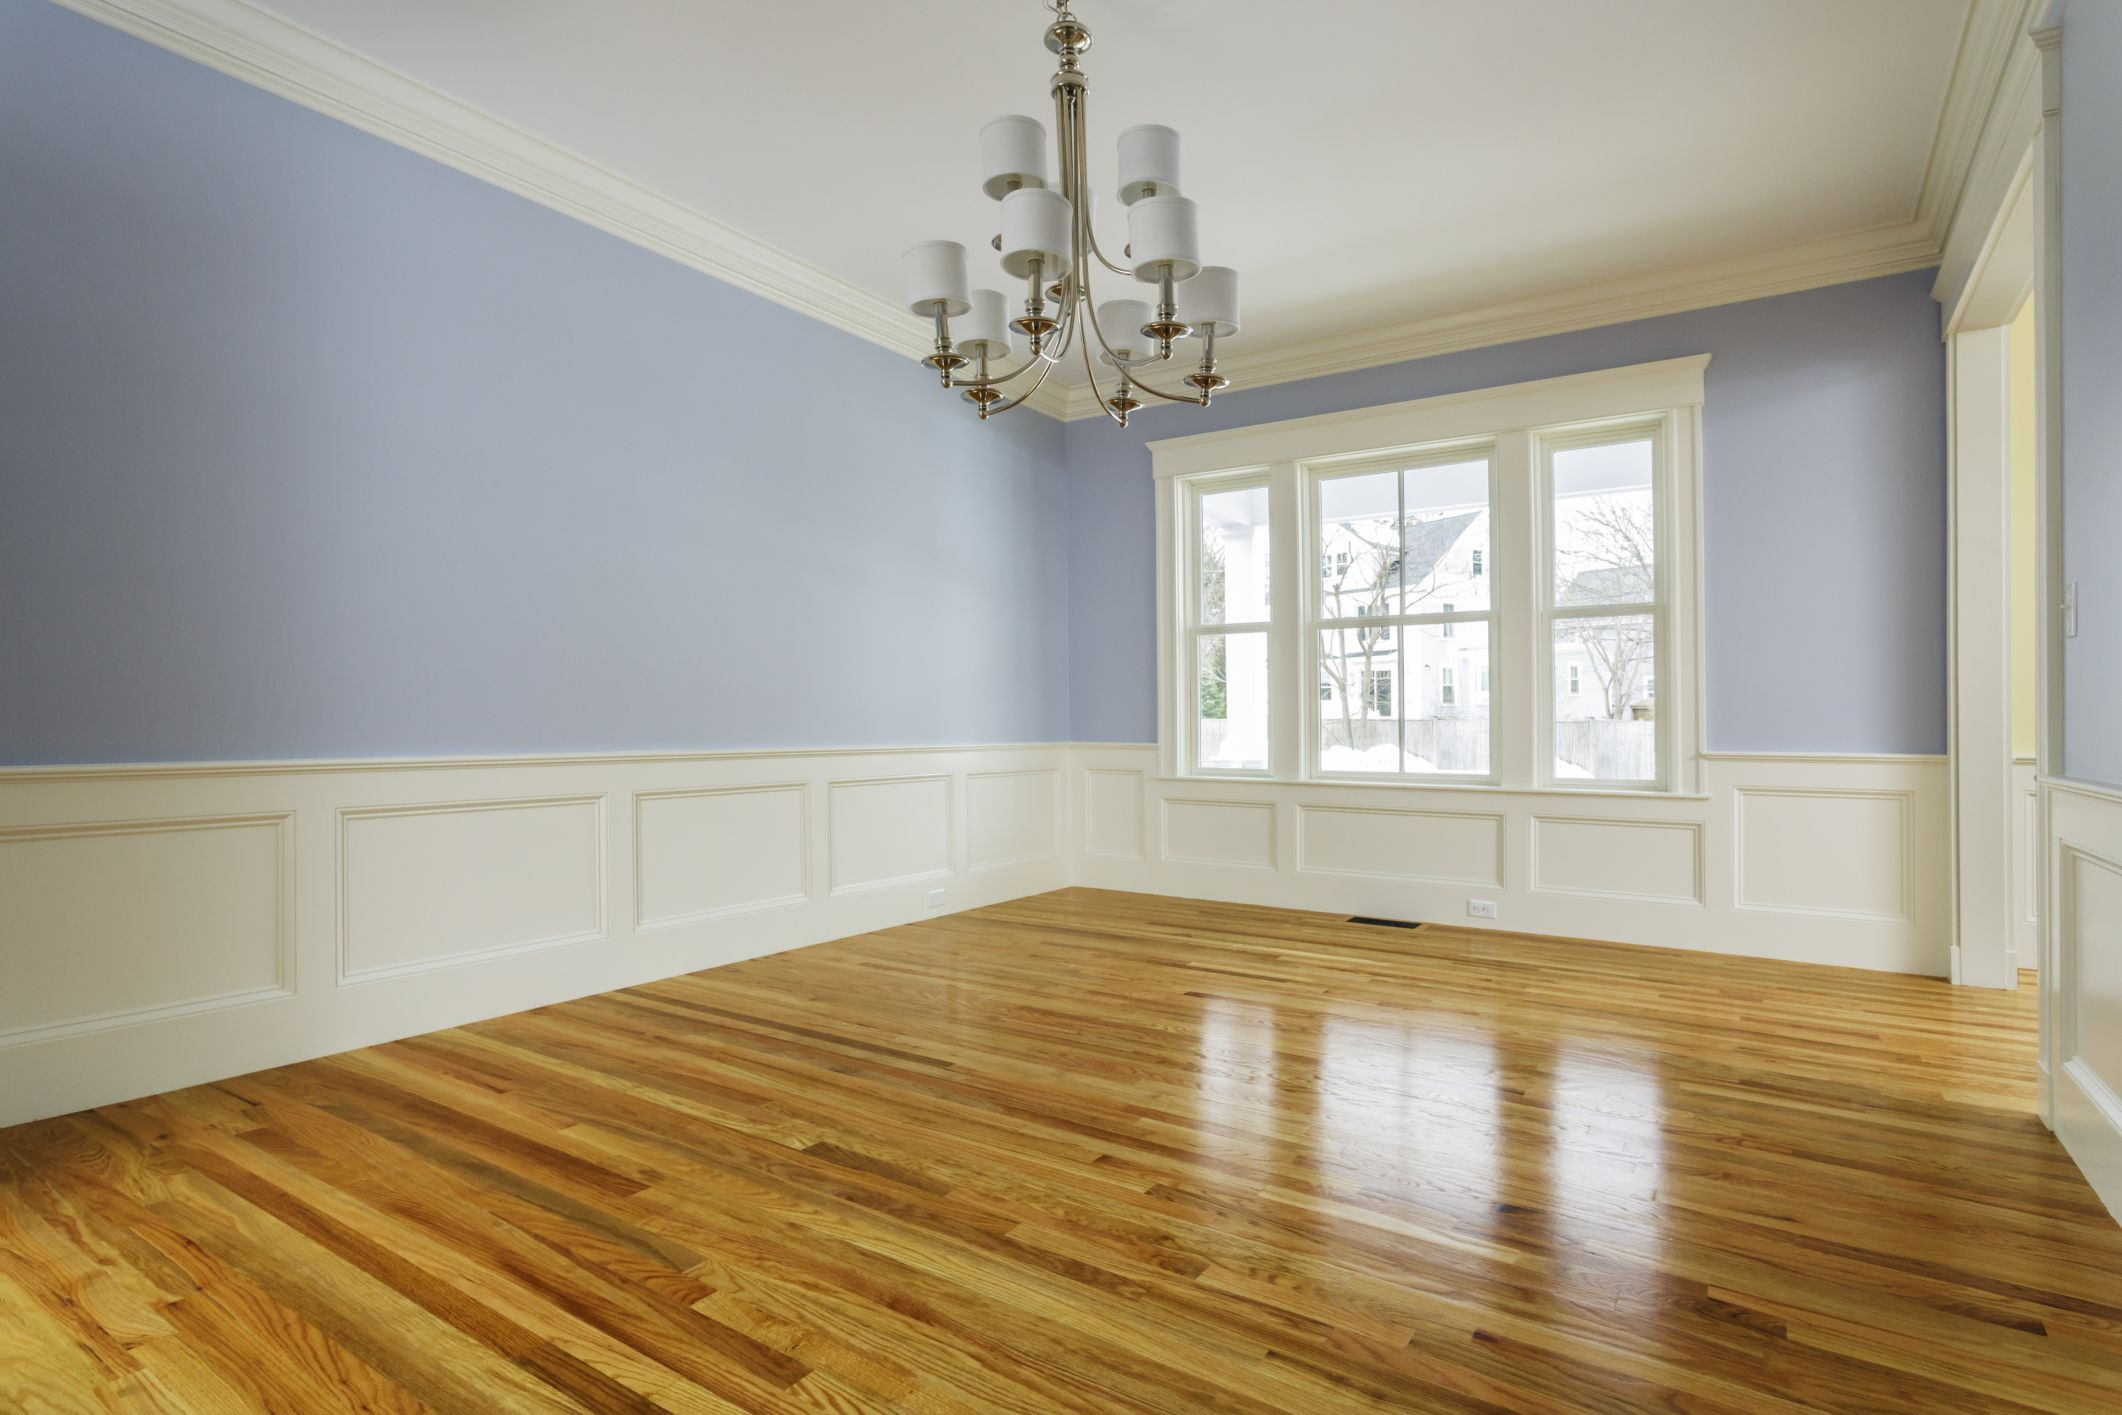 24 Recommended How Long Does It Take to Refinish Hardwood Floors 2023 free download how long does it take to refinish hardwood floors of the cost to refinish hardwood floors with regard to 168686572 highres 56a2fd773df78cf7727b6cb3